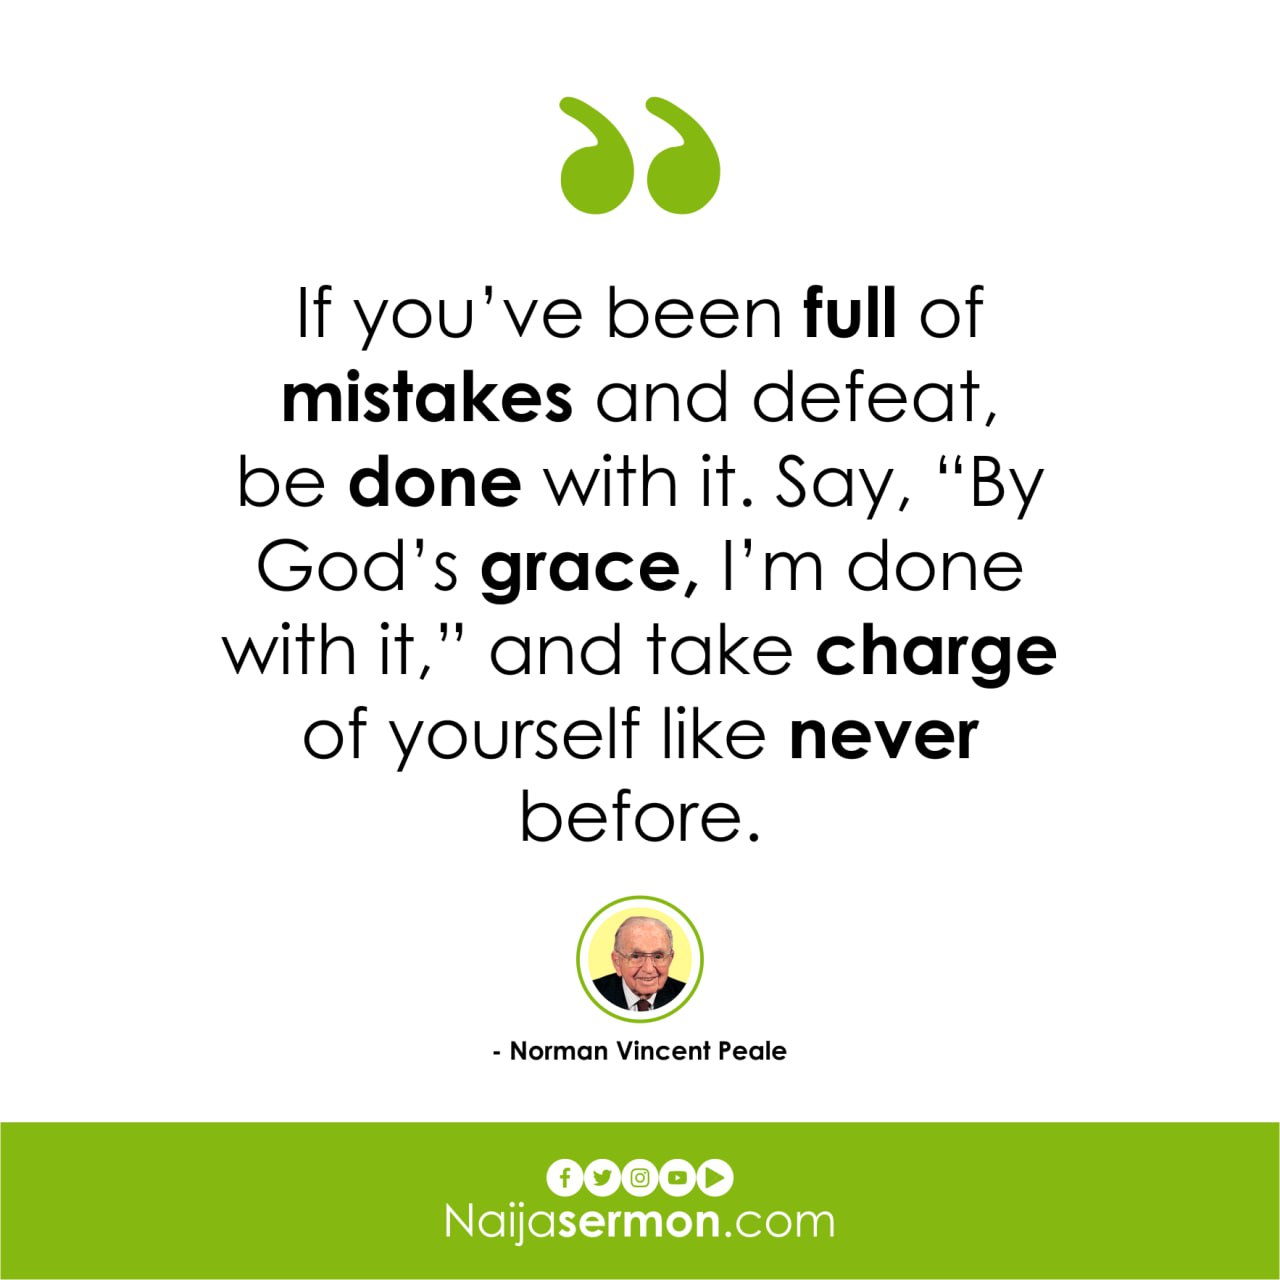 QUOTE OF THE DAY BY NORMAN VINCENT PEALE 8